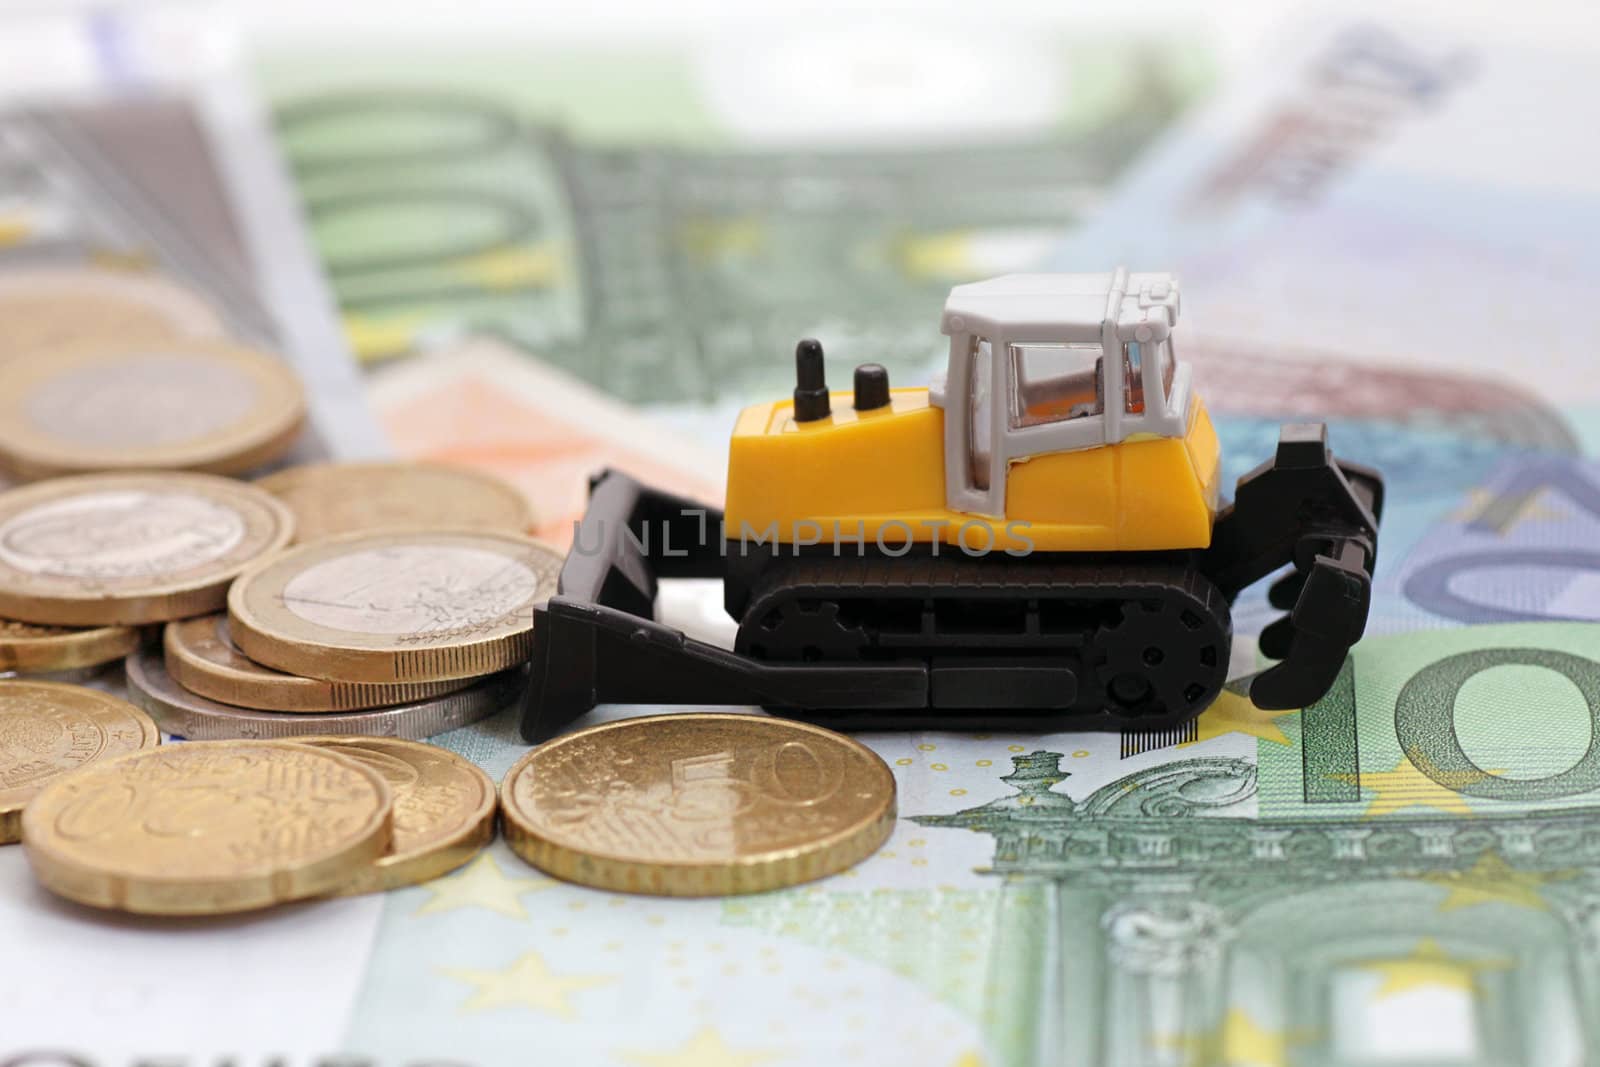 tractor rakng coins on euro banknotes